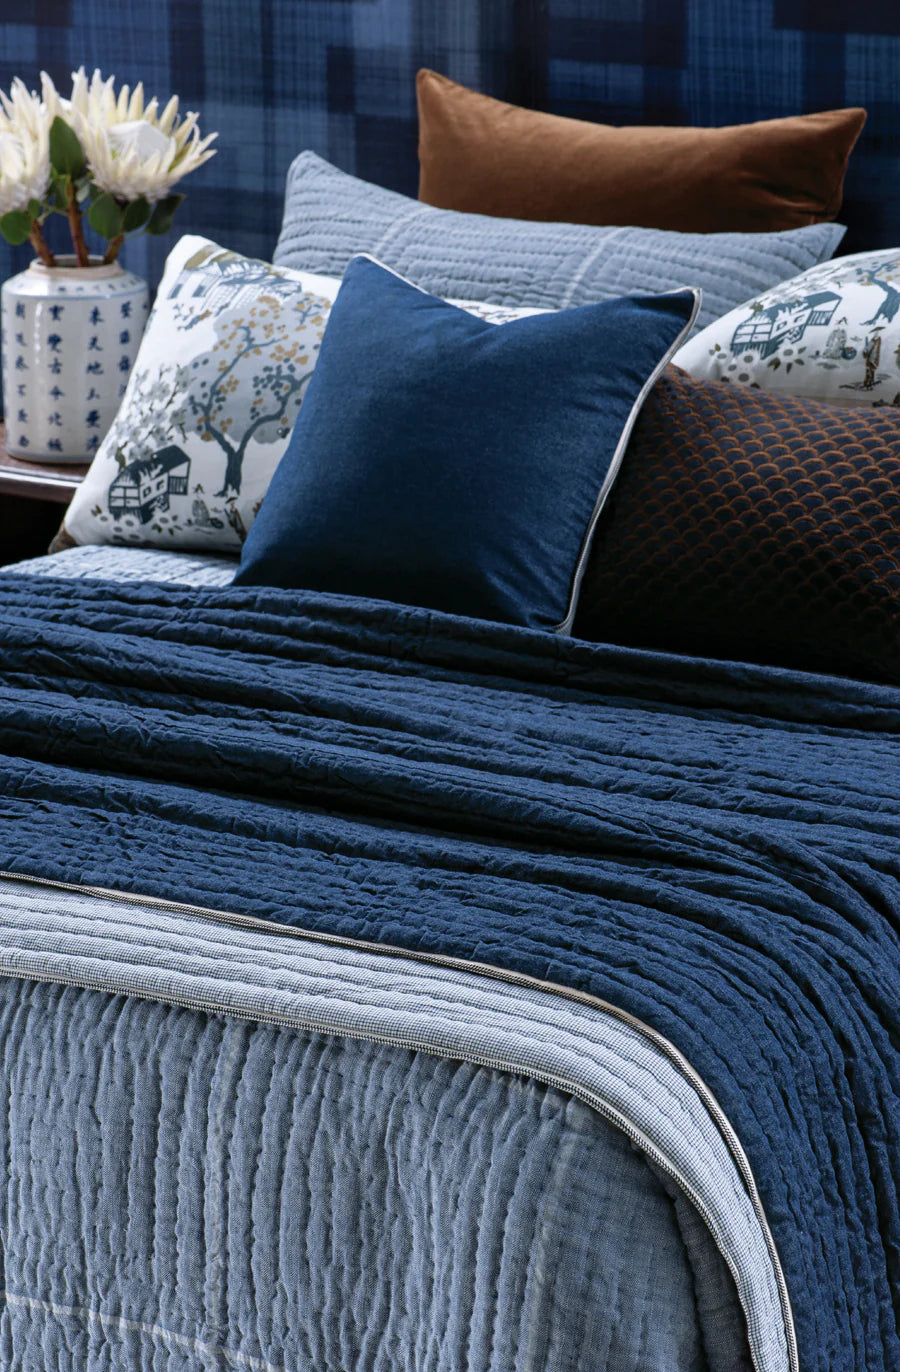 Appetto hand quilted coverlet denim 240 x 220cm